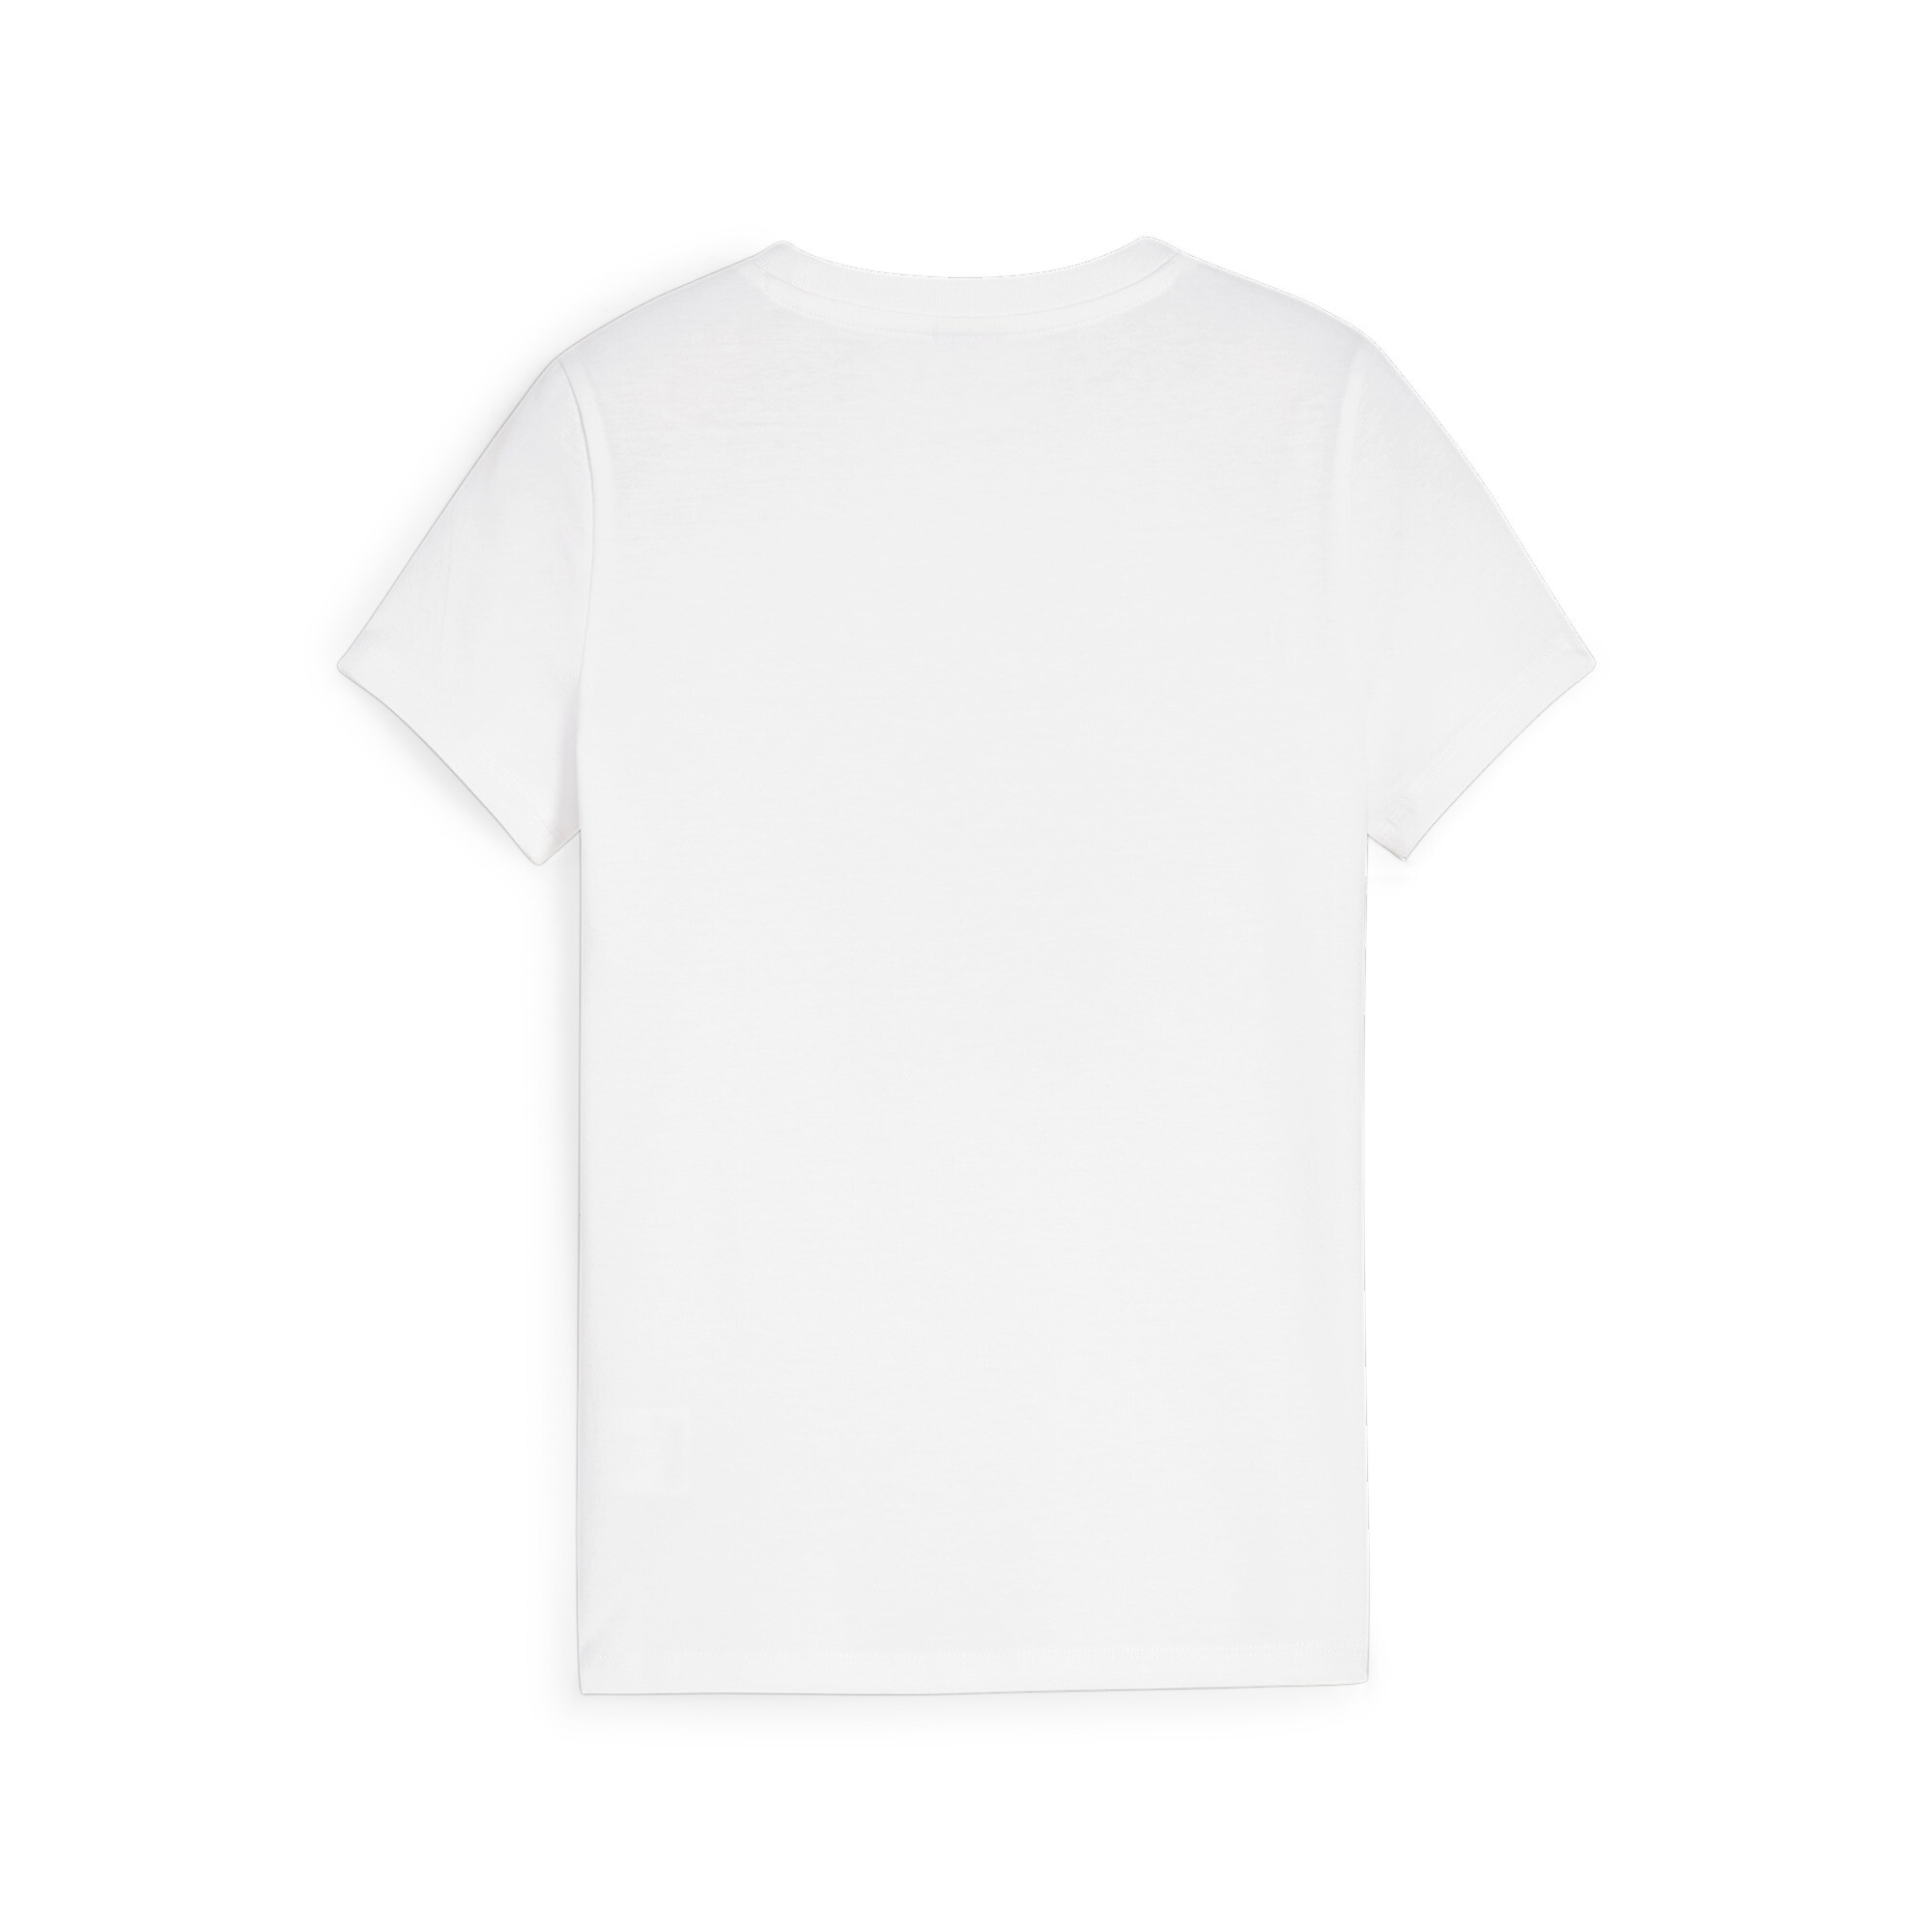 PUMA GRAPHICS MTCH PNT T-Shirt In White, Size 13-14 Youth